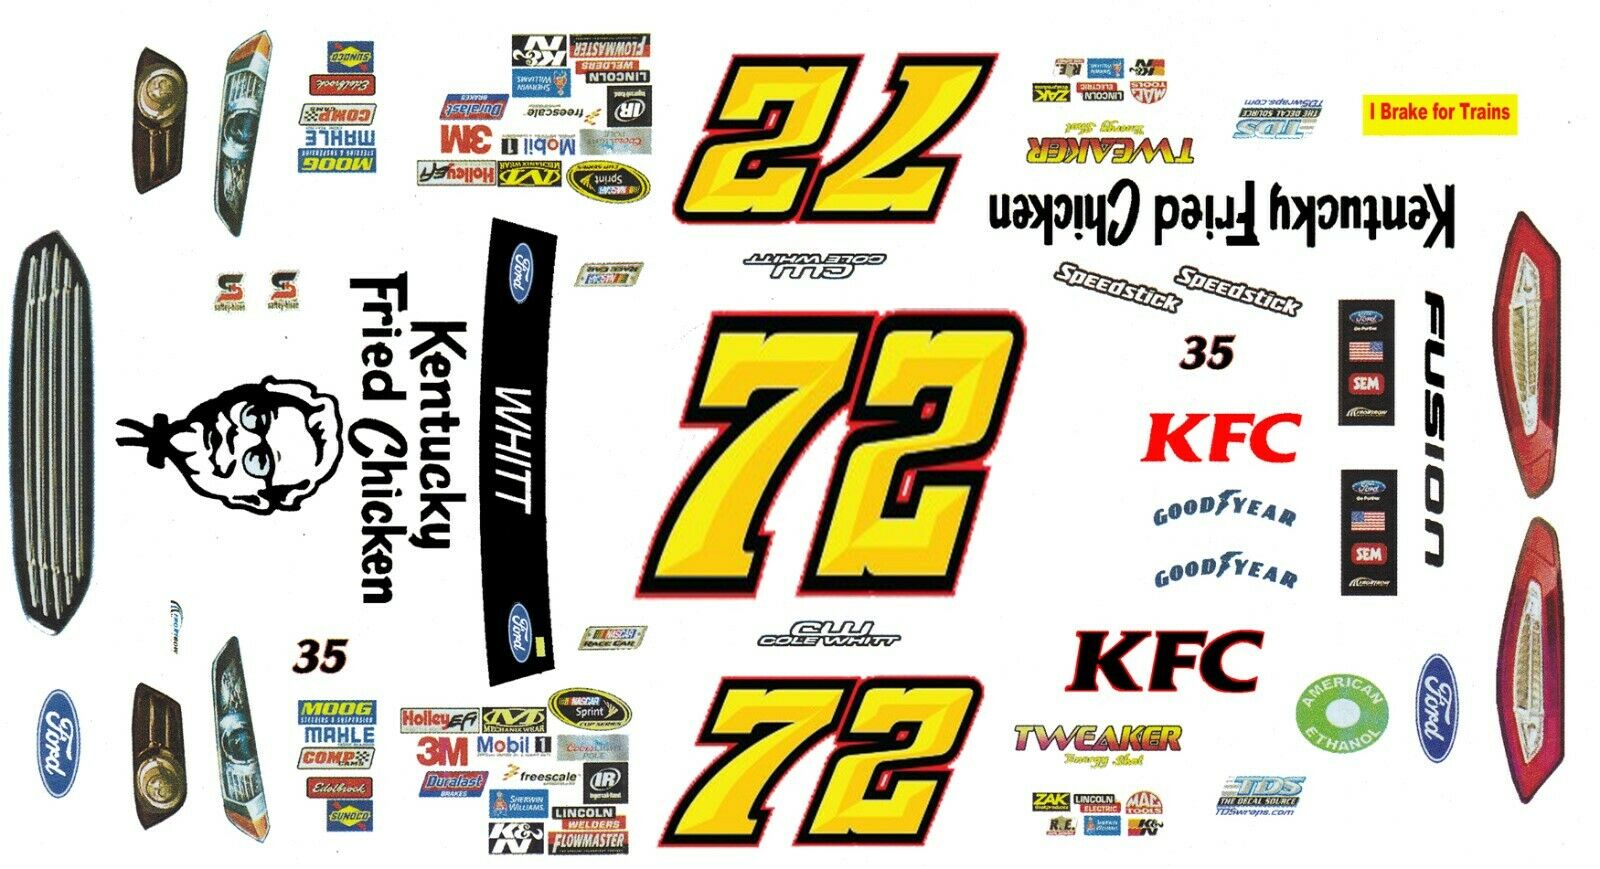 #72 Cole Whitt KFC Ford Fusion 1/43rd Scale Slot Car Decals